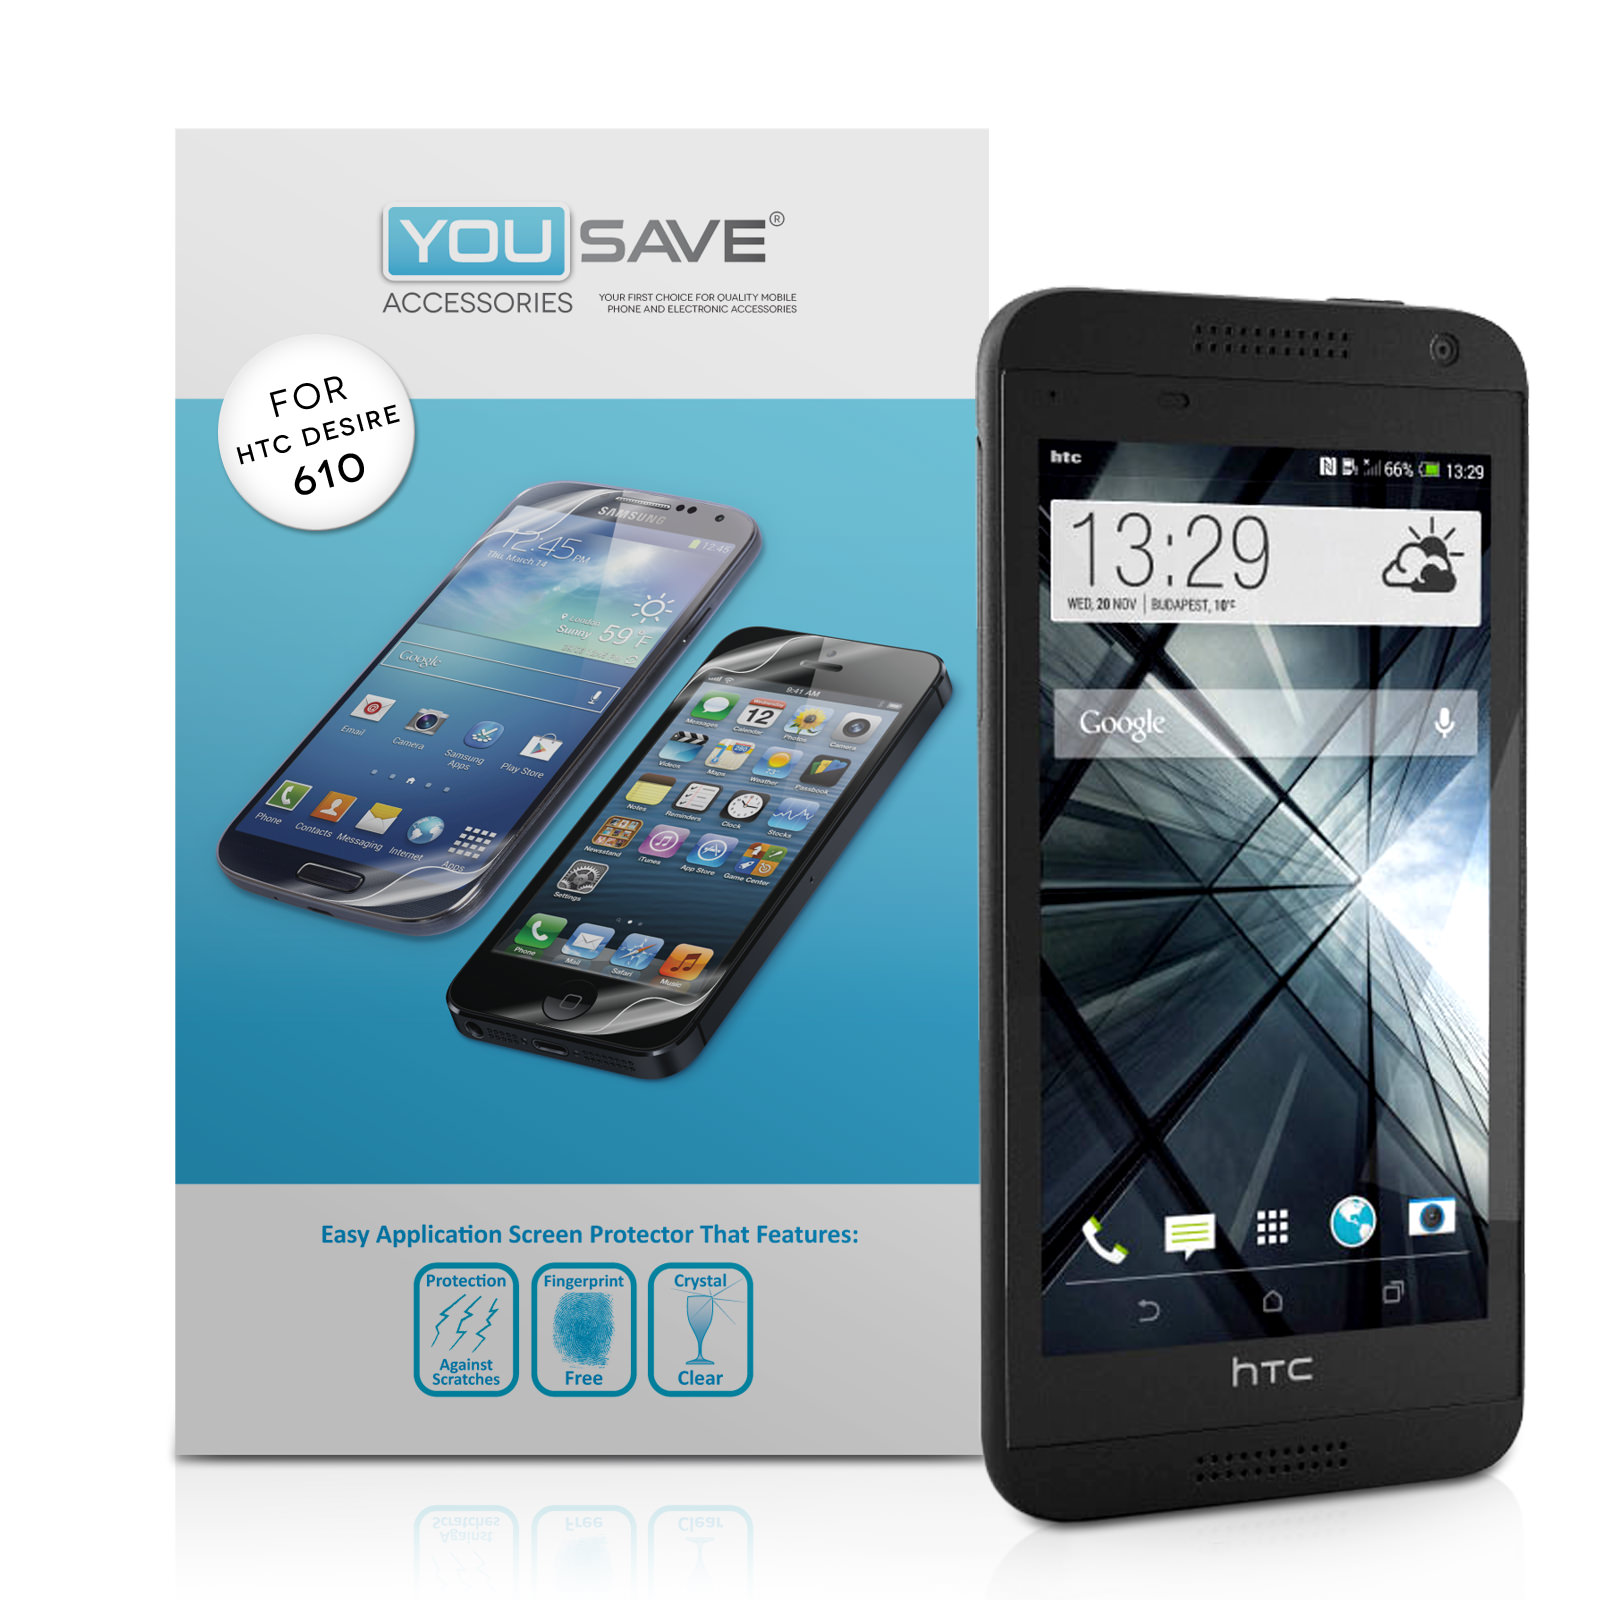 YouSave Accessories HTC Desire 610 Screen Protectors x5